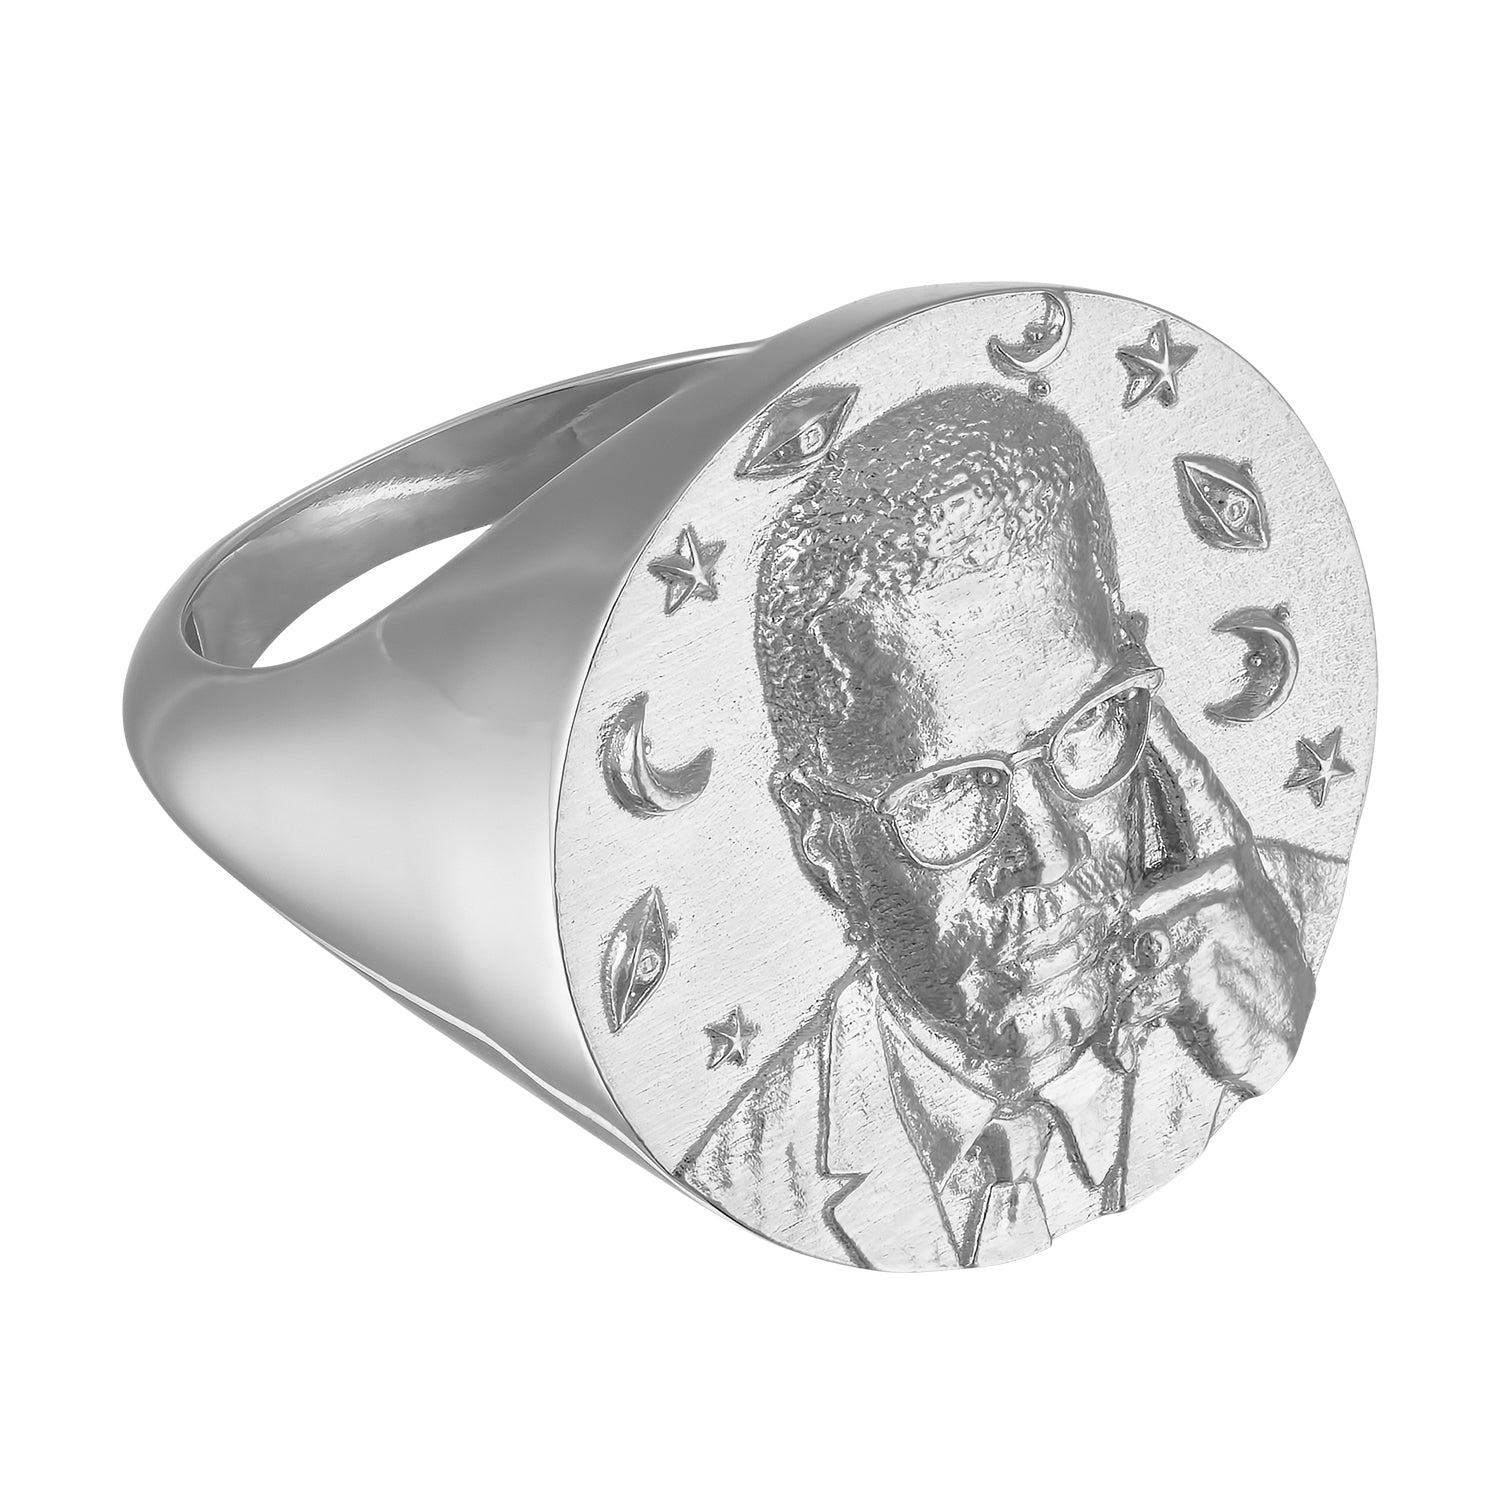 Malcolm X Large Signet Ring